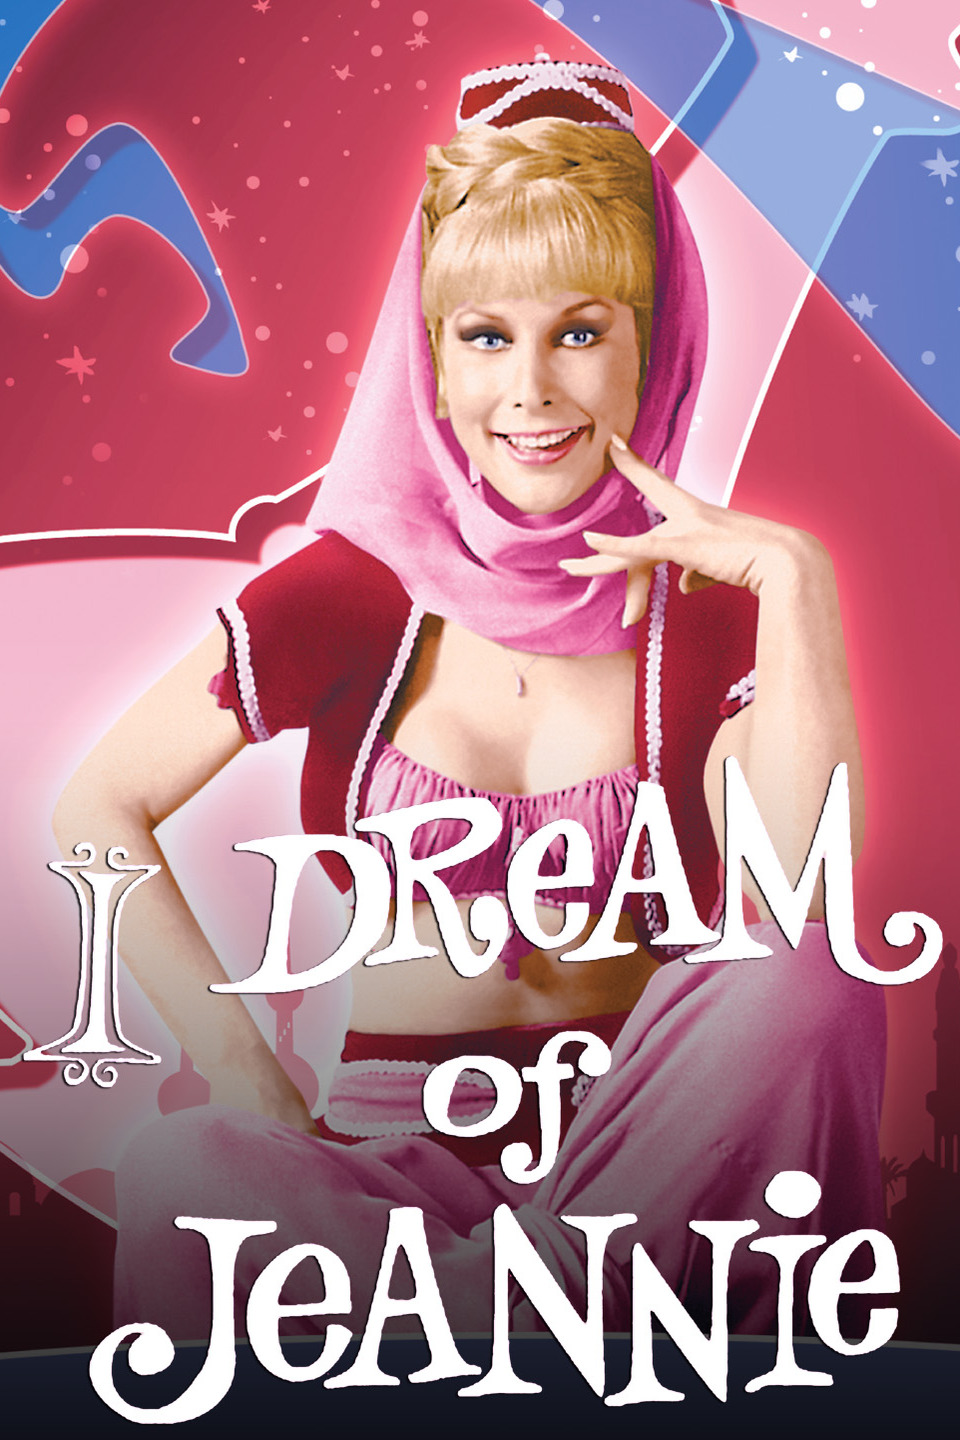 I Dream of Jeannie - Rotten Tomatoes